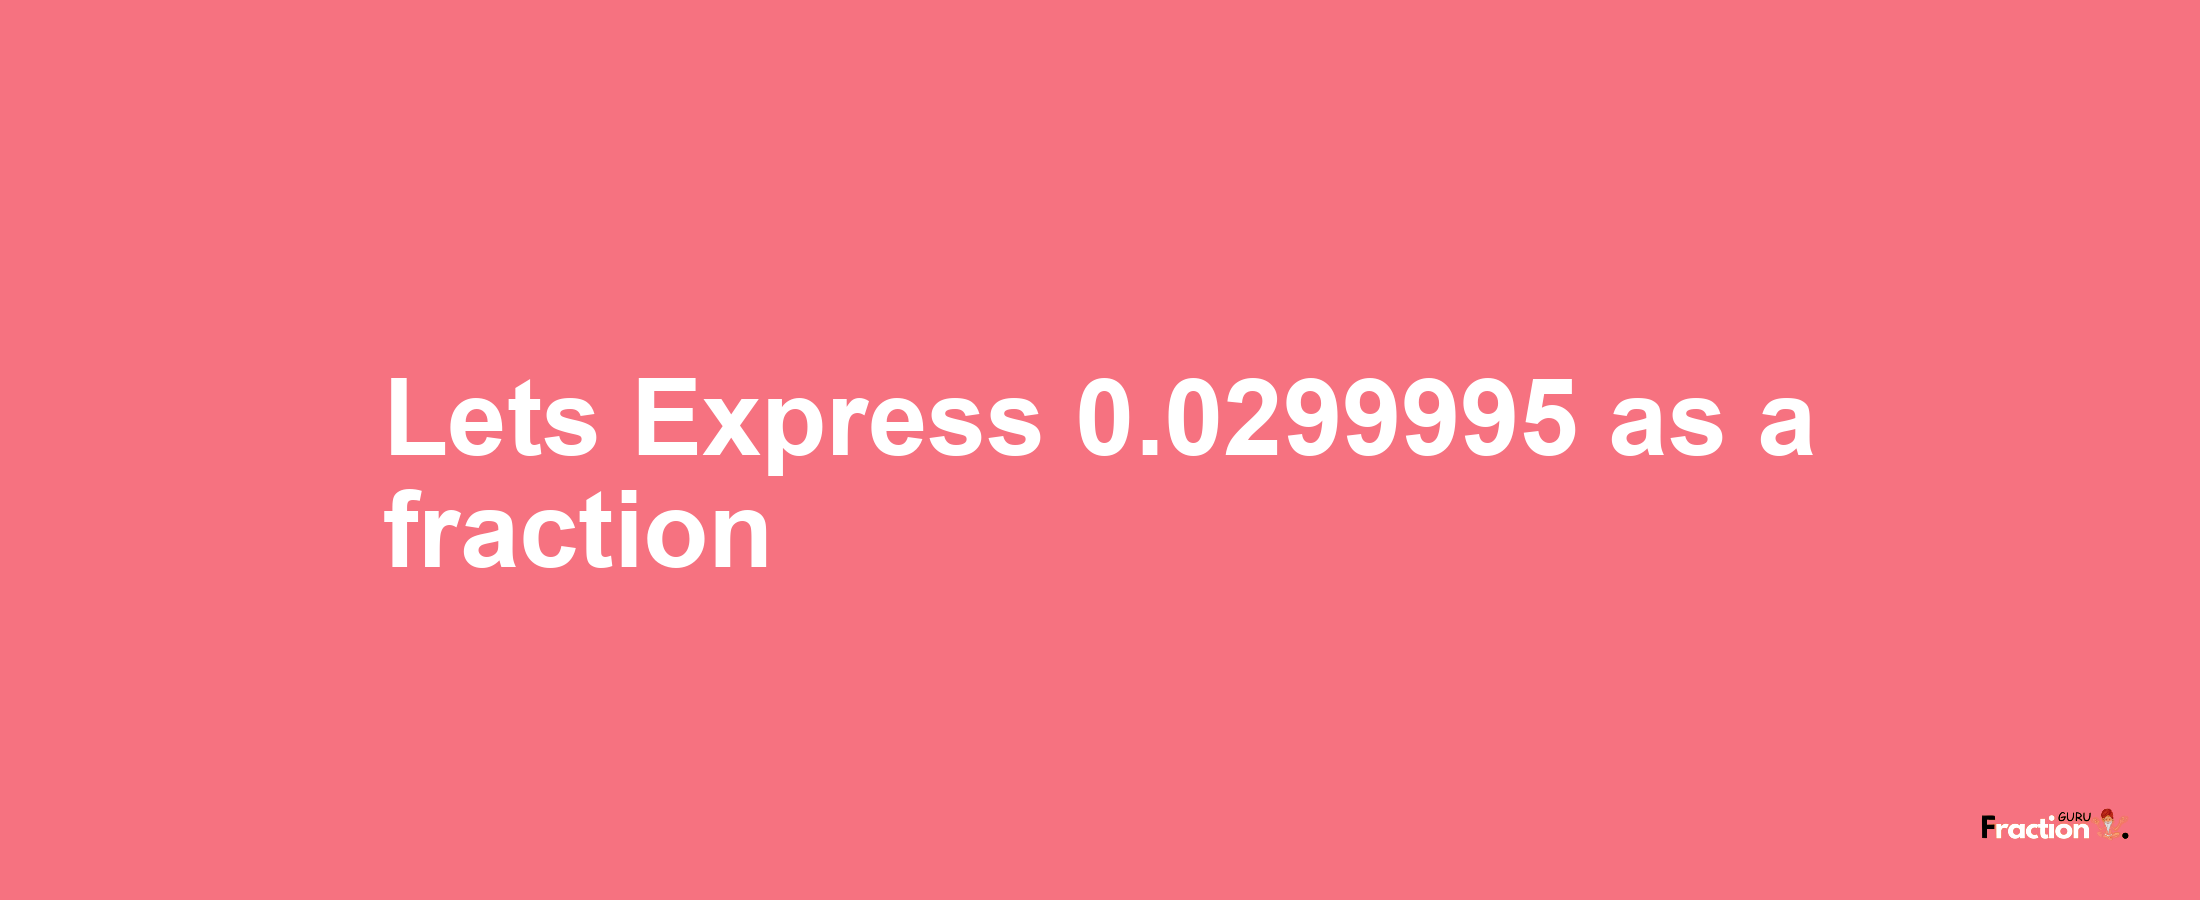 Lets Express 0.0299995 as afraction